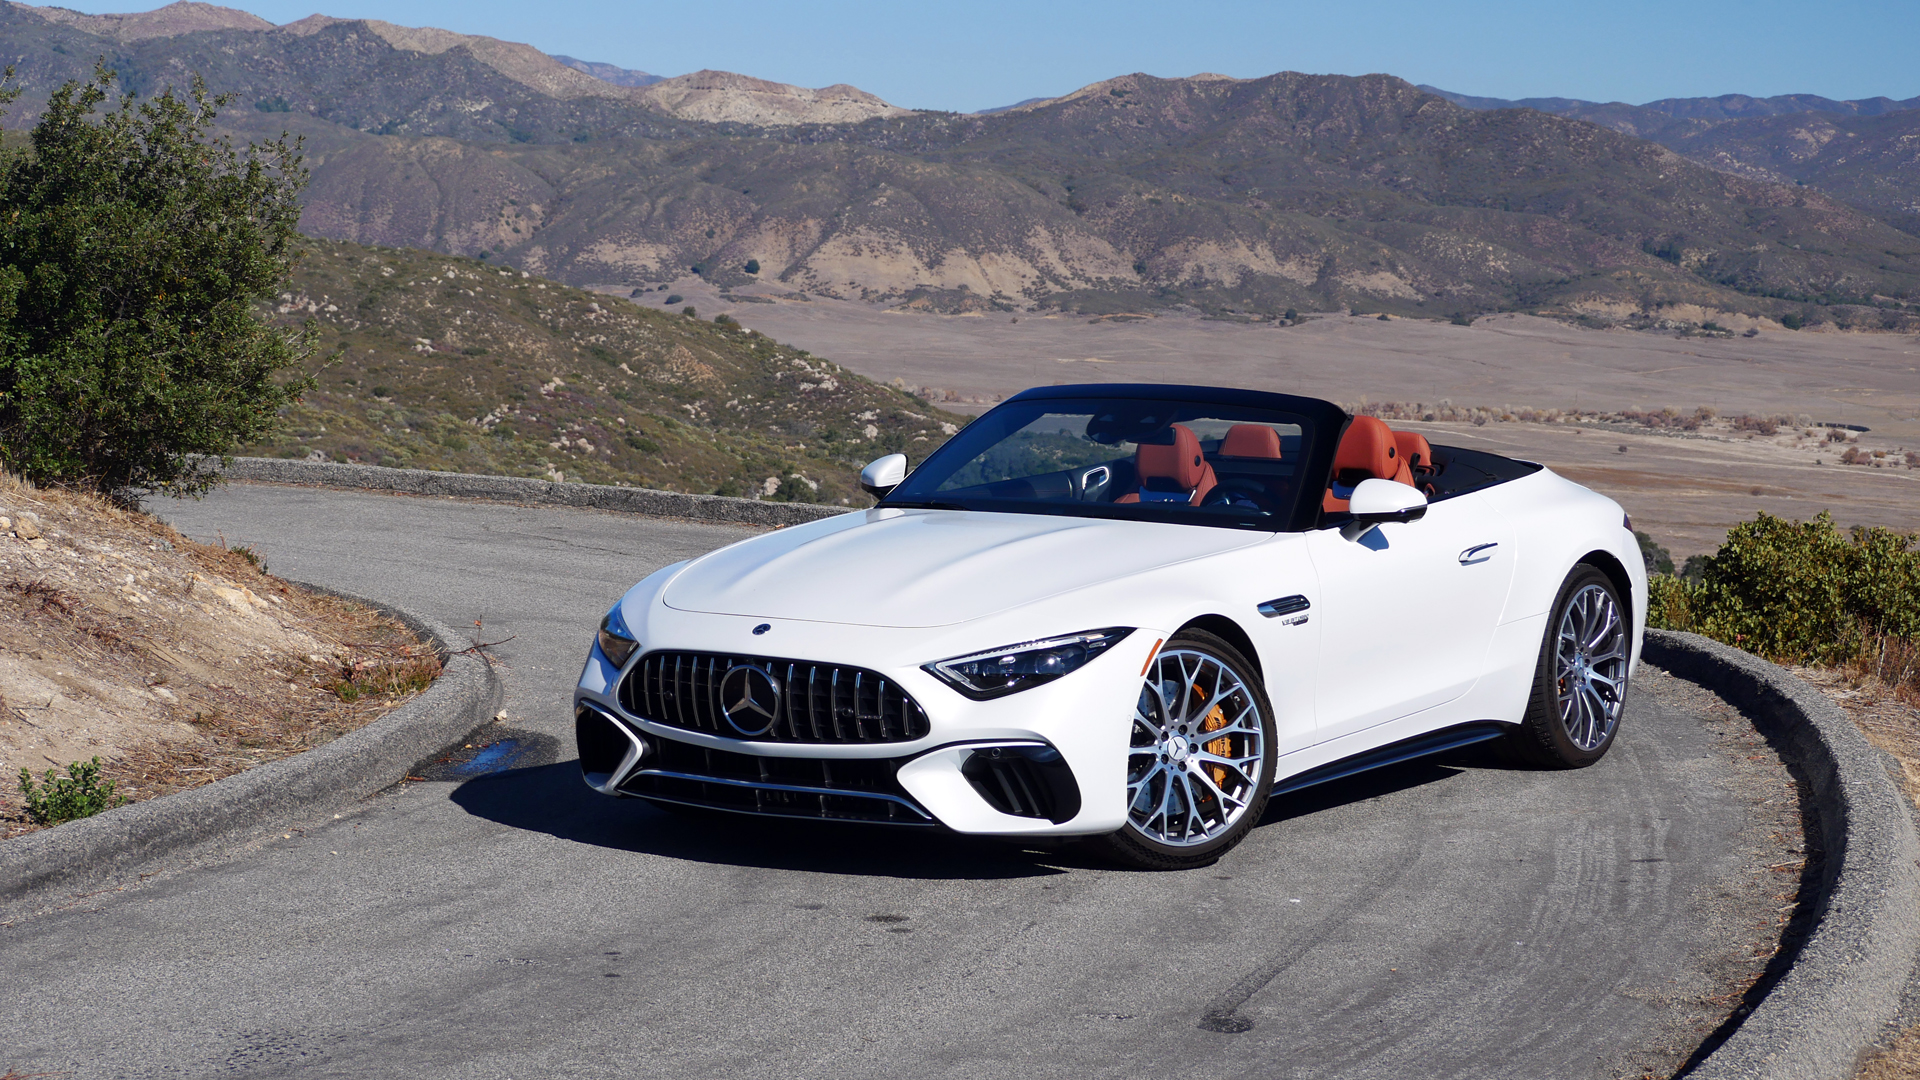 2022 MercedesAMG SL 55 First Drive Review When 55 is greater than 63